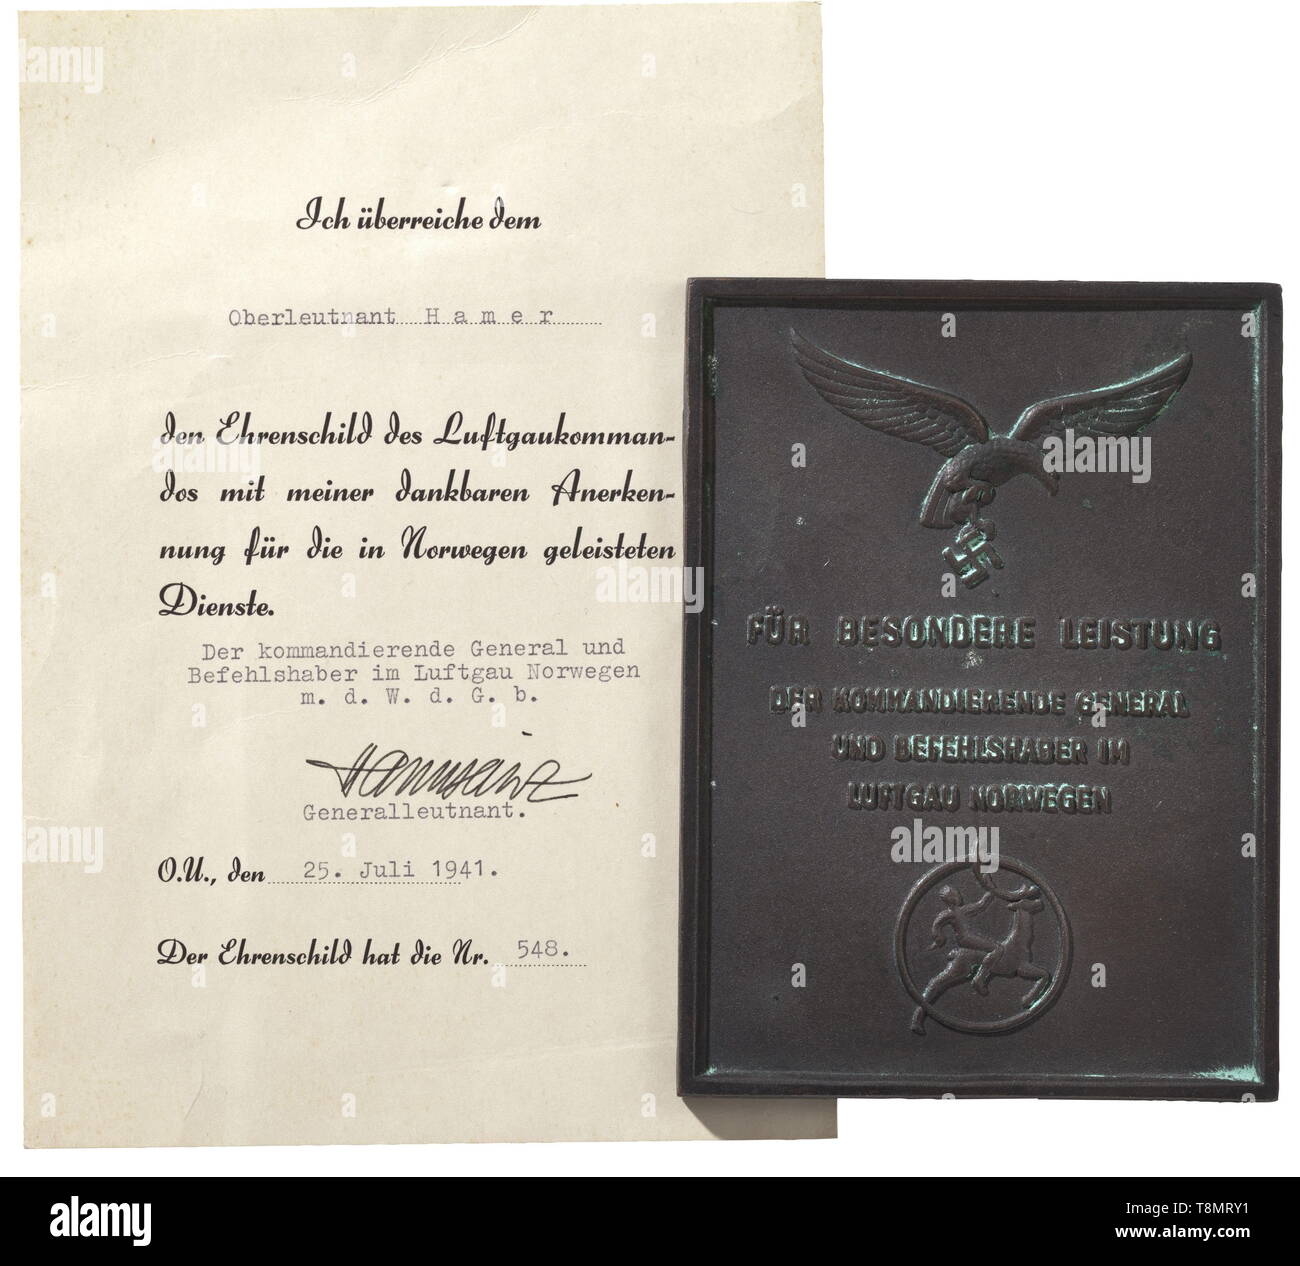 An honour plaque for Special Achievement in Air District Norway - Knight's Cross winner Reino Hamer Award document (no. 548) for the plaque awarded on 25 July 1941 to Oberleutnant Hamer with original signature of the commanding general. Included is the plaque, with reverse frame assembly, number and Oslo maker's mark. The document and the plaque with matching numbers. Document dimensions 15 x 21 cm, plaque dimensions 11 x 15 cm. Reino Hamer was awarded the Knight's Cross of the Iron Cross on 5 September 1944 as a Hauptmann (captain) while in command of I./Fallschirm-Jäger R, Editorial-Use-Only Stock Photo